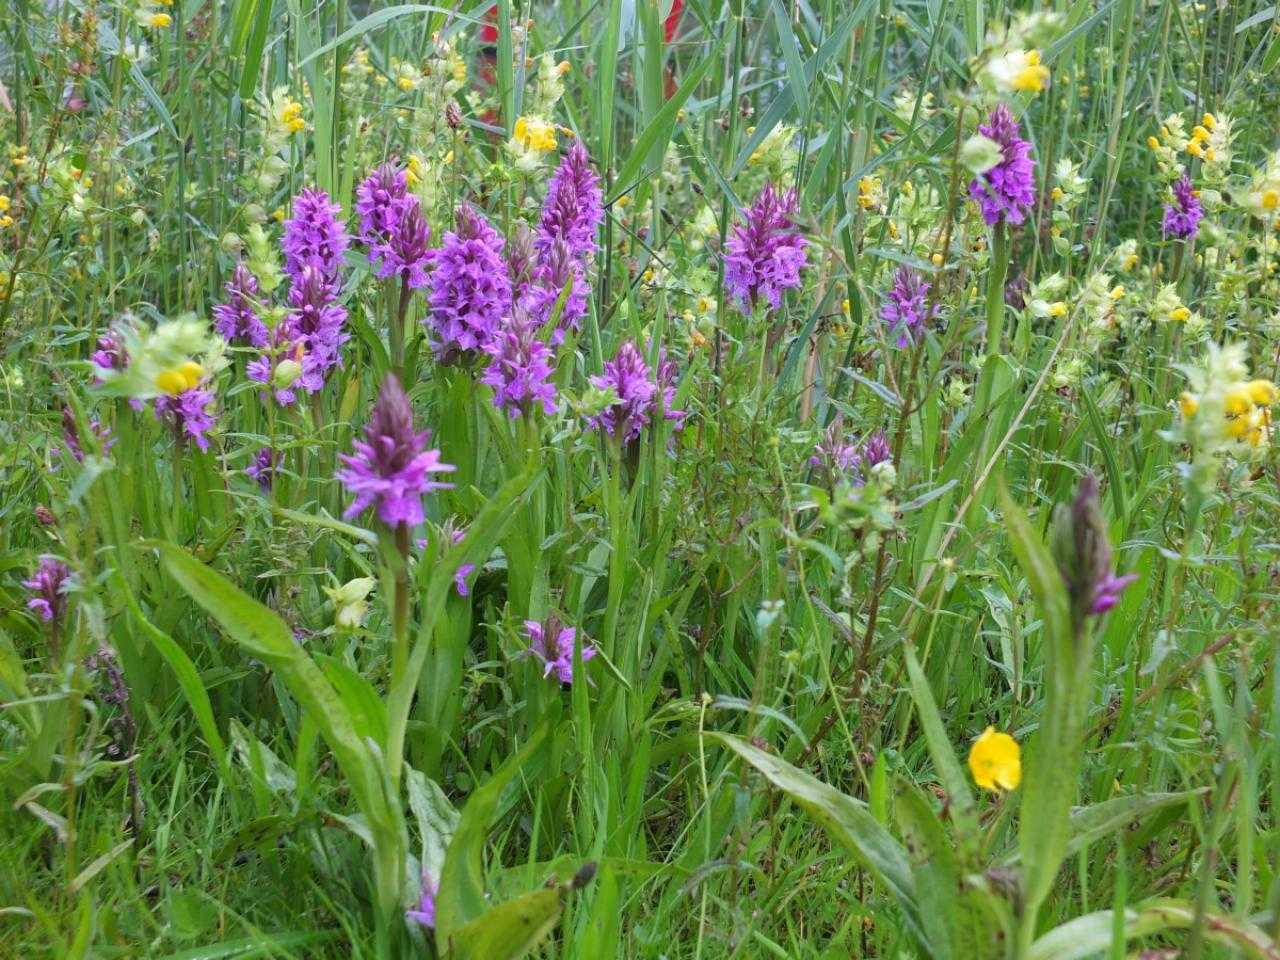 Orchids in the wild in Hoofddorp